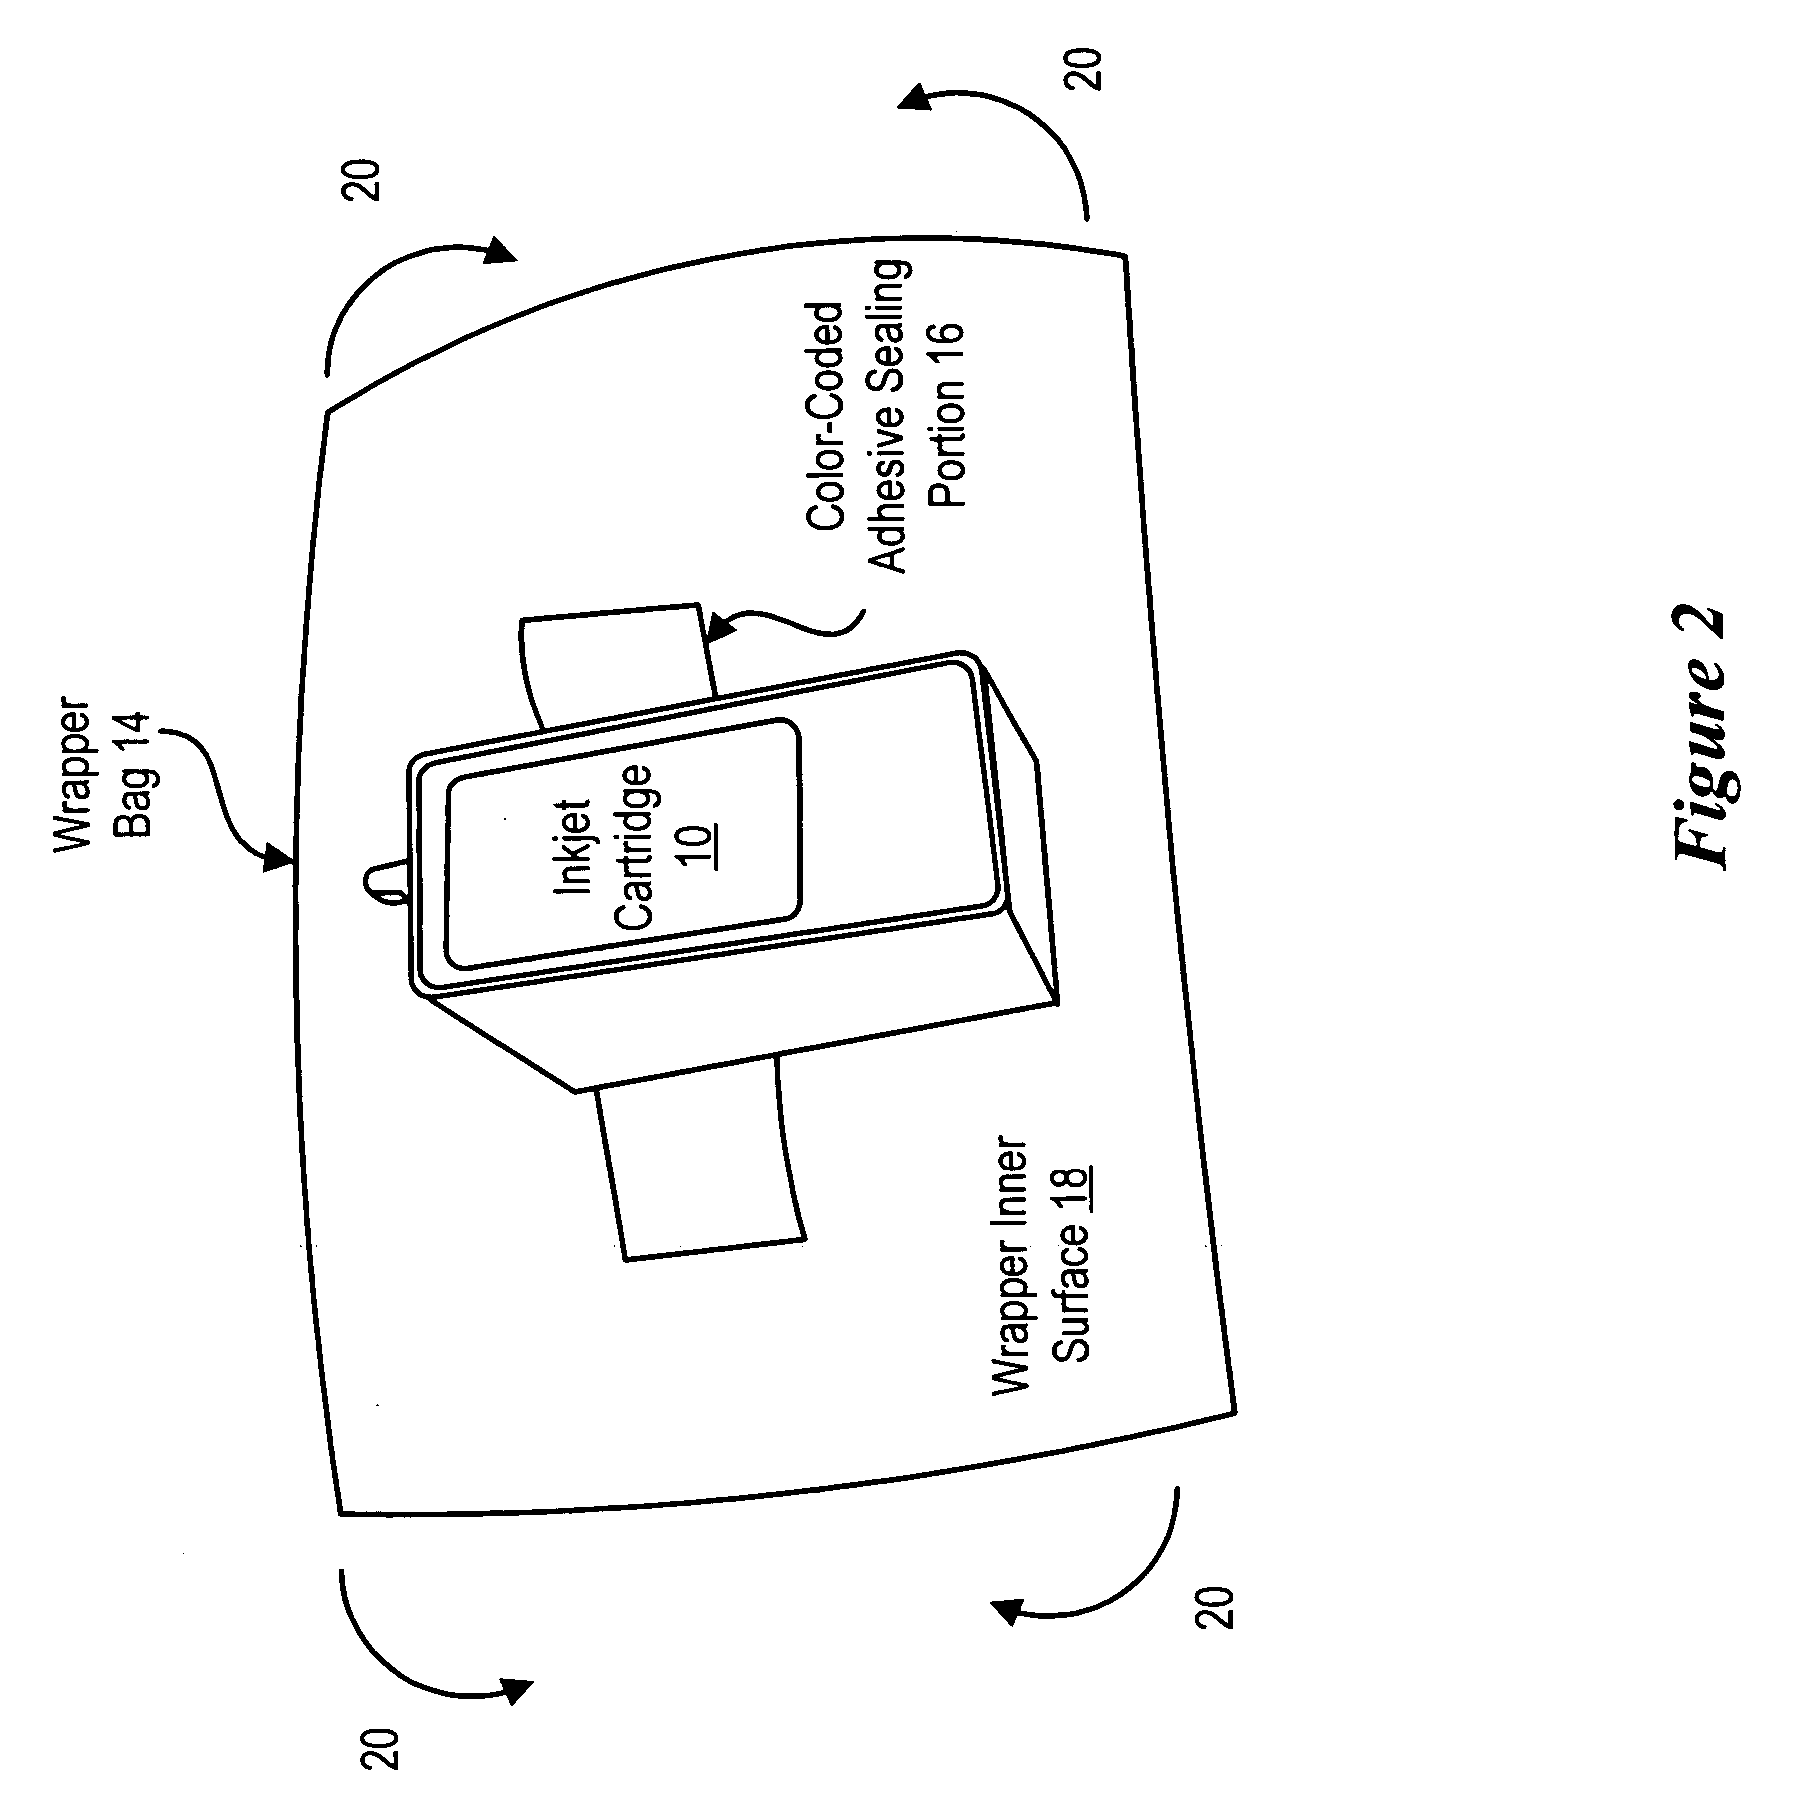 System and method for integrated tape seal package